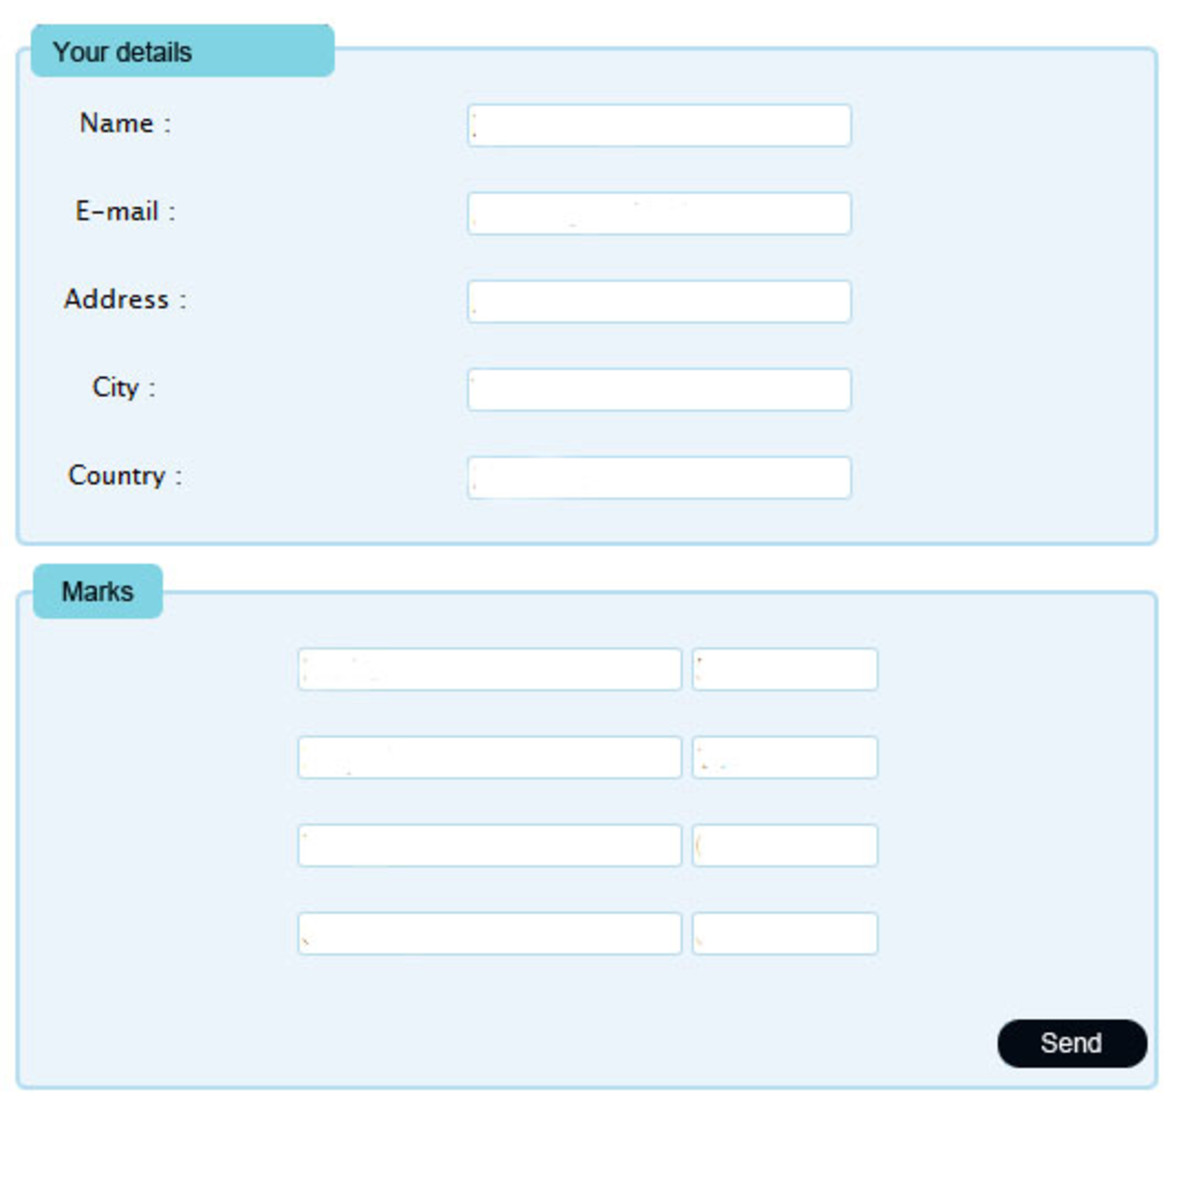 Create HTML form using lists and css/html | HubPages